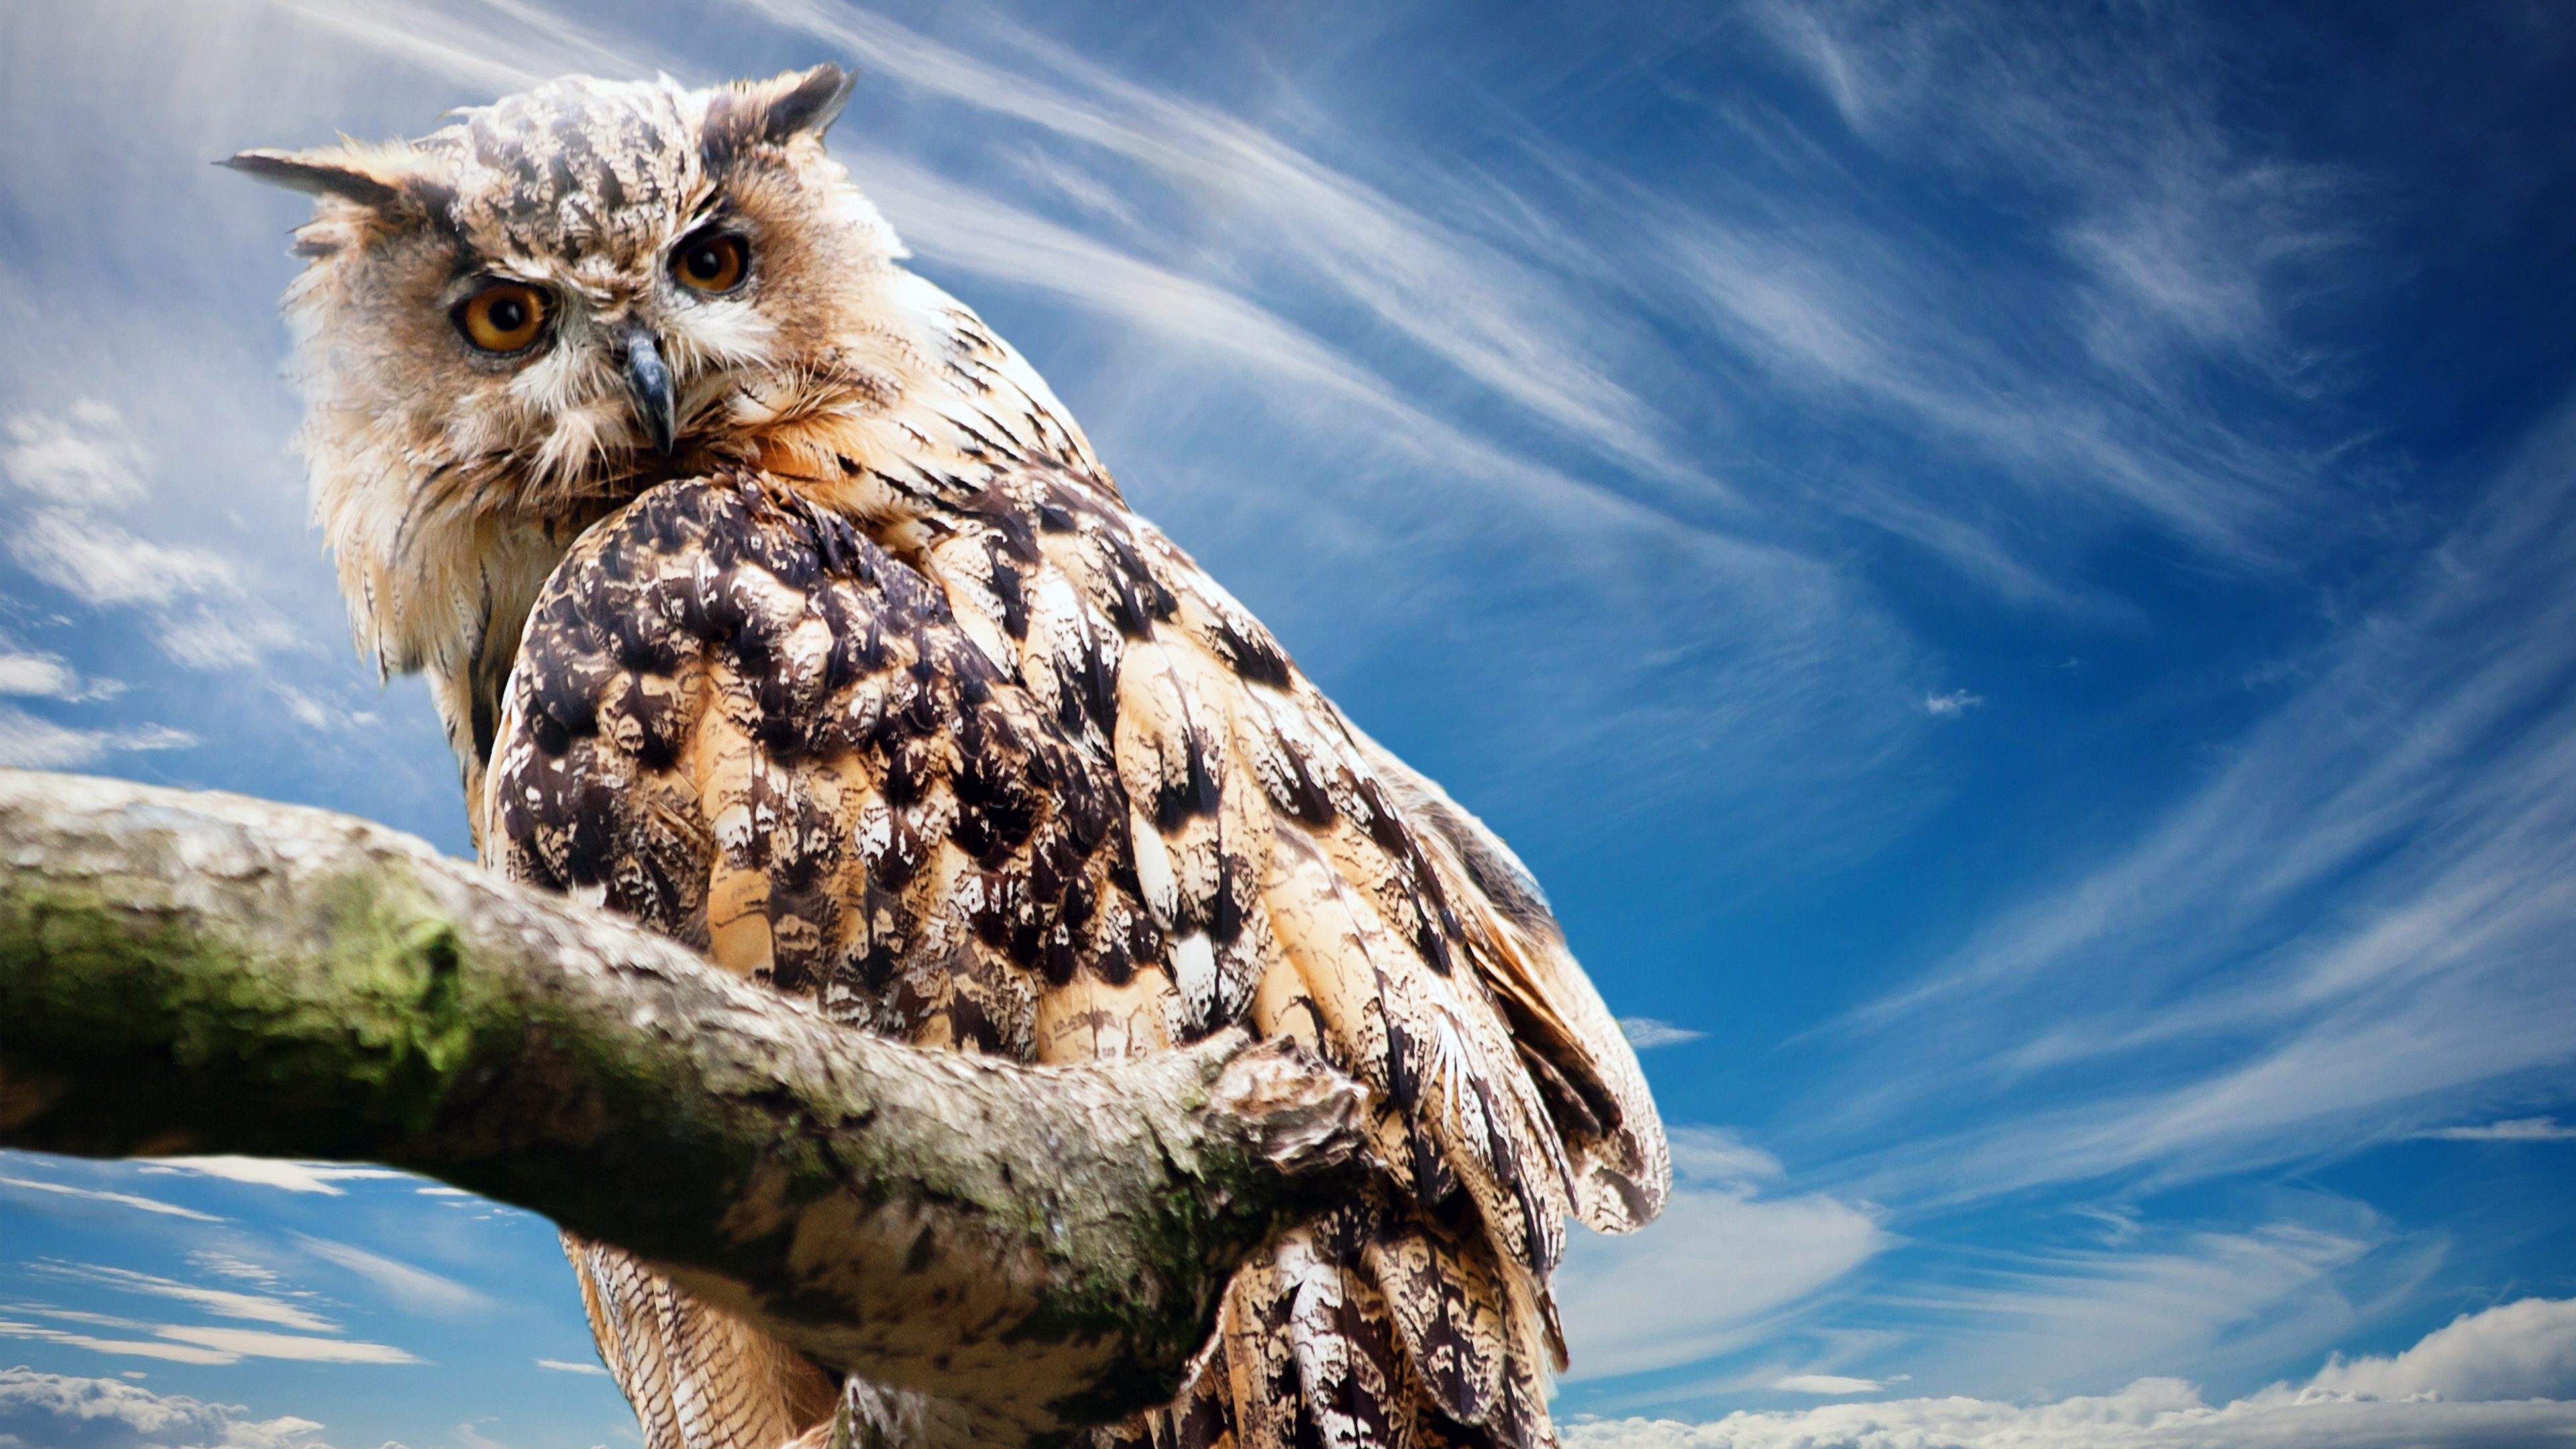 4K Great horned owl Wallpaper and Background Image